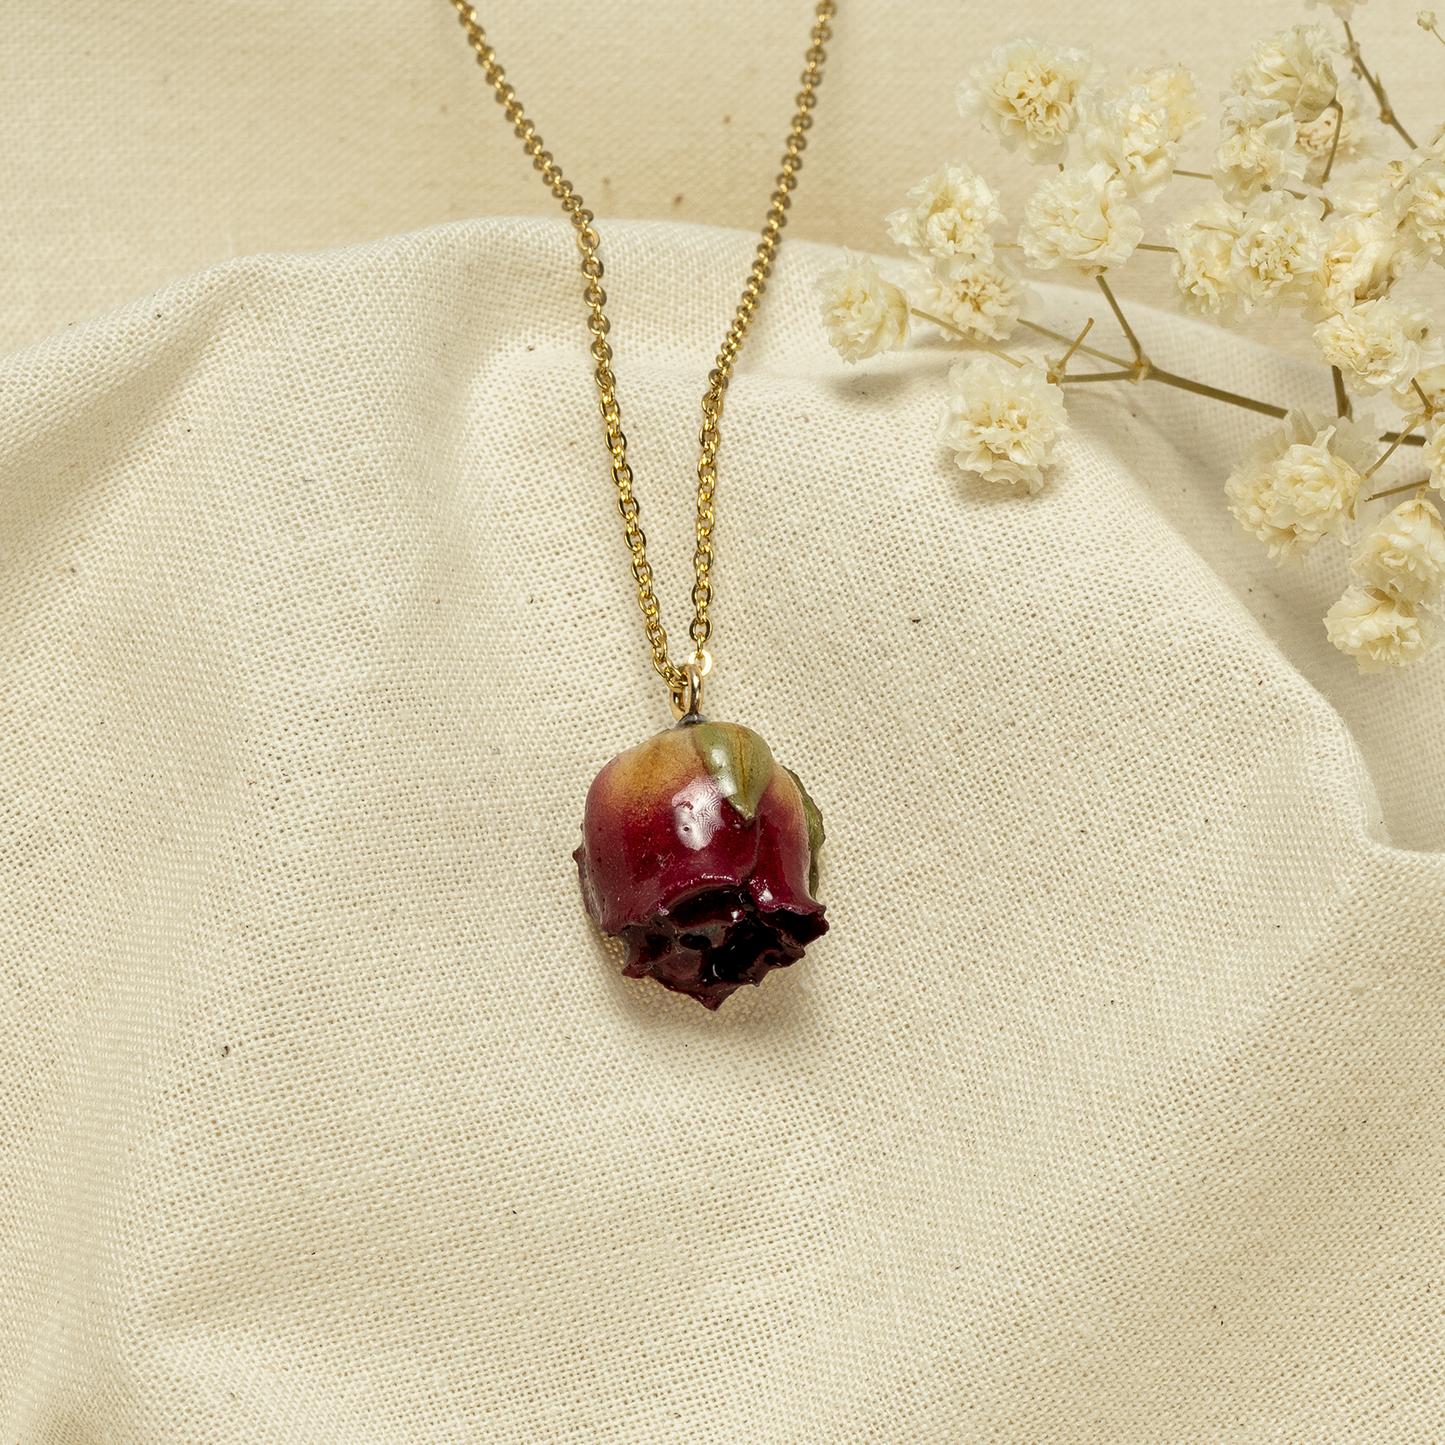 "Sempiterna" Necklace with real rose bud